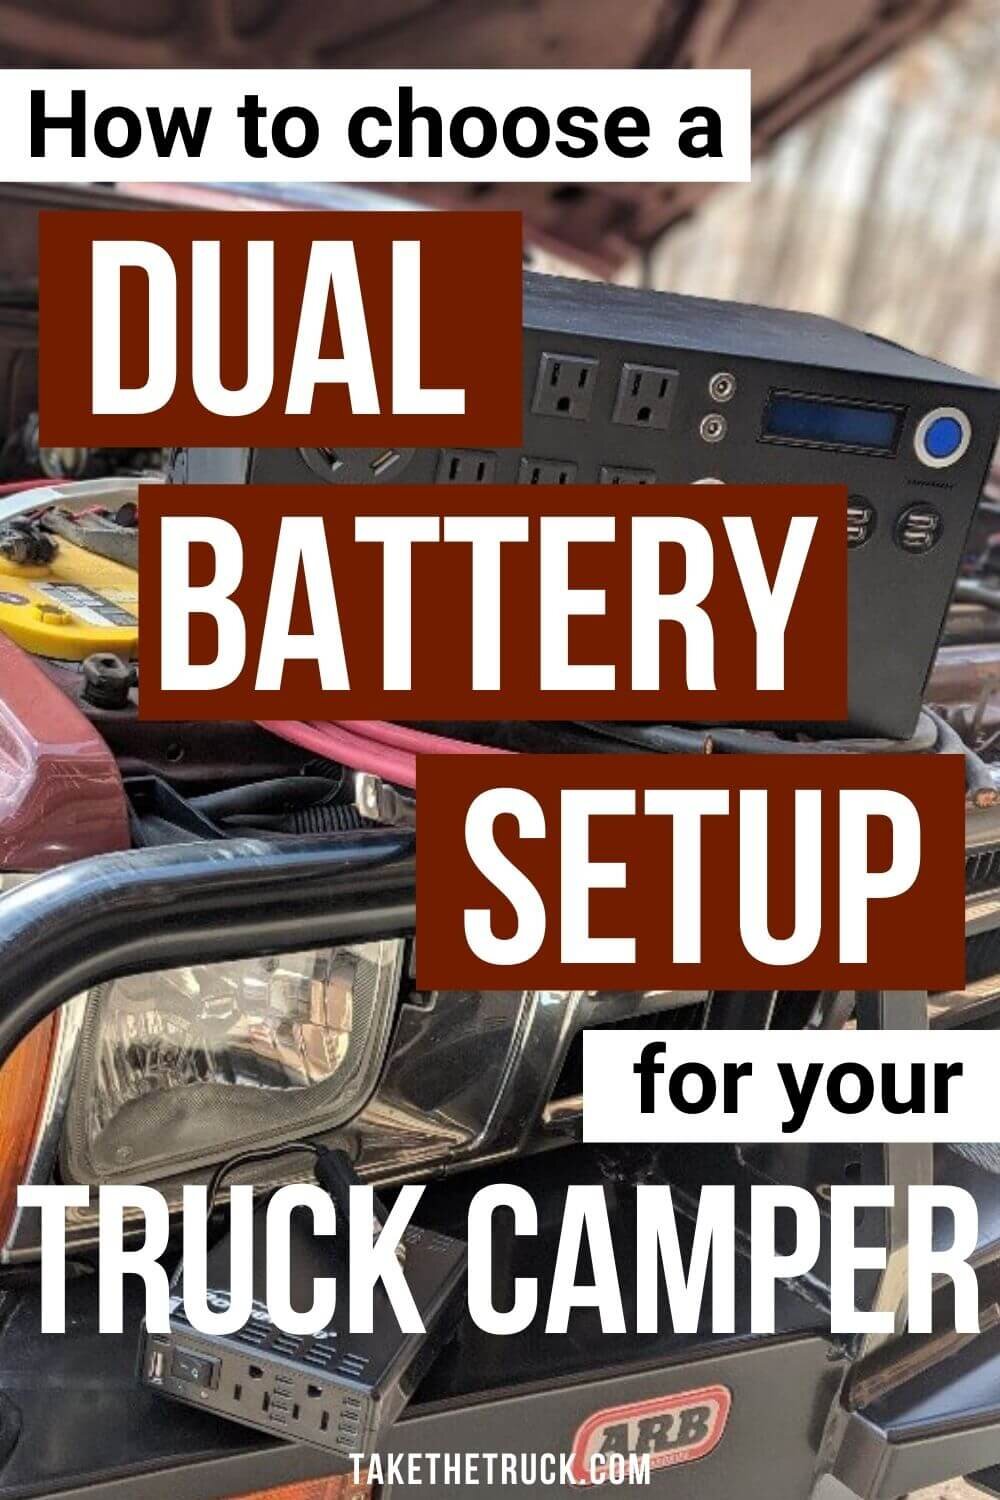 A dual battery setup can provide a reliable way to meet your electrical needs while camping off grid. Select the right dual battery system for your next camping or overlanding trip.